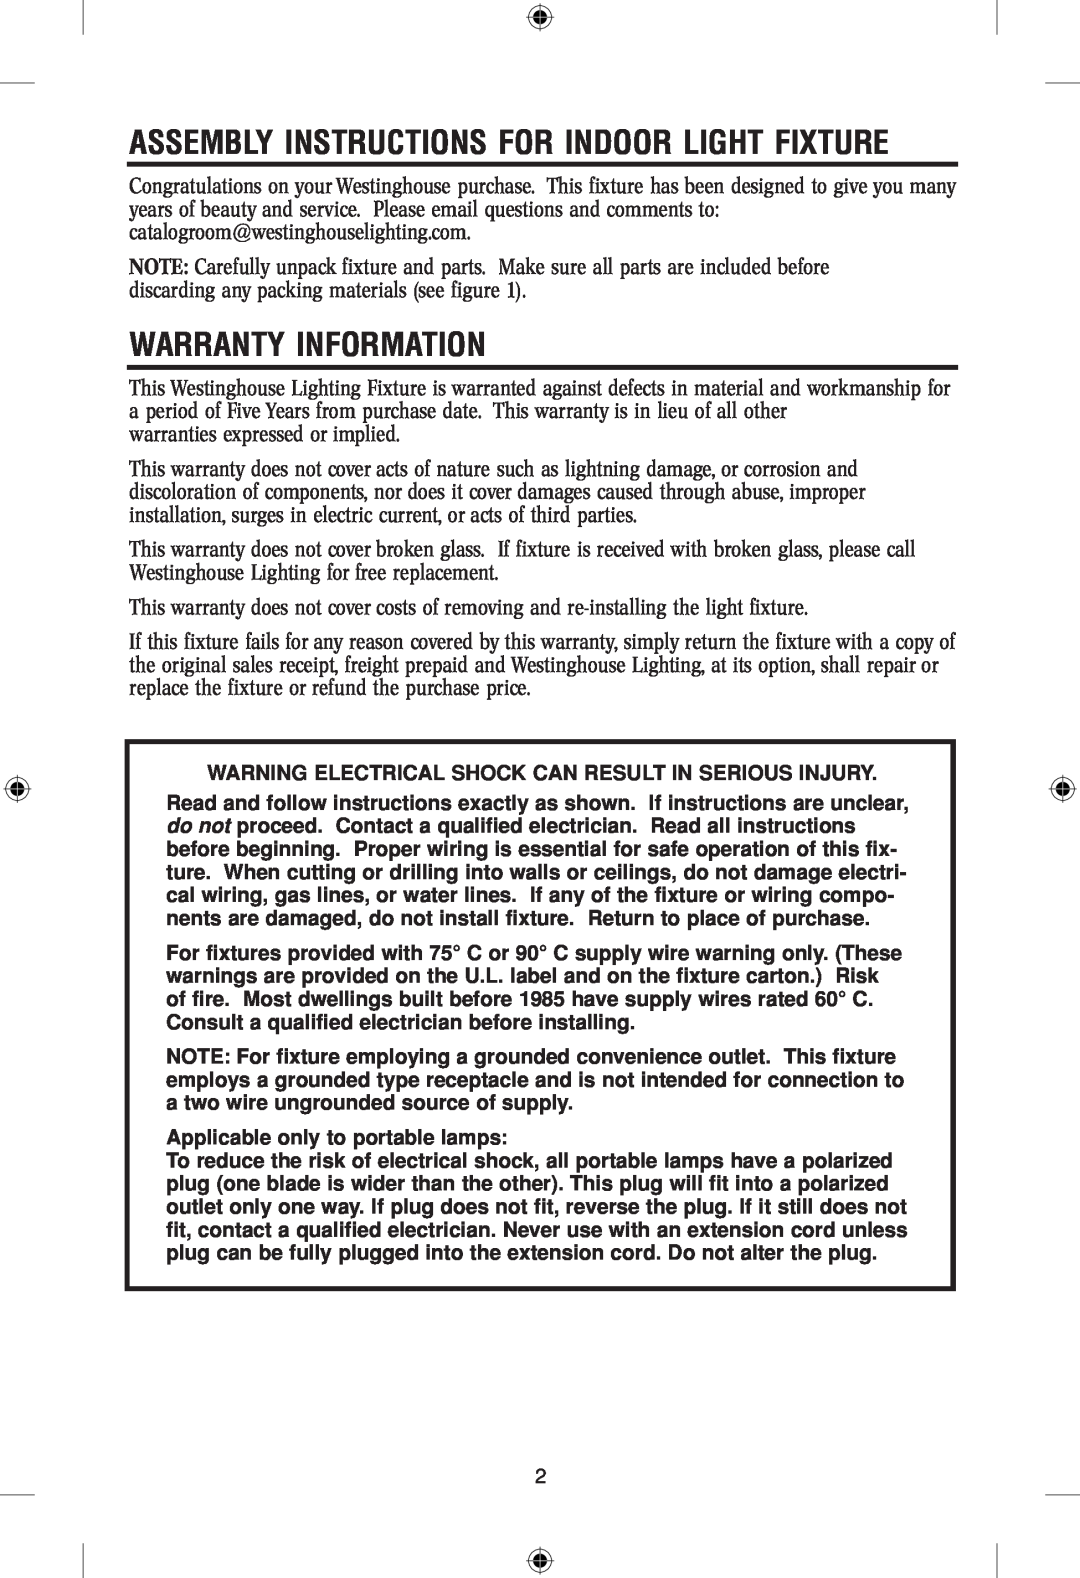 Westinghouse 101304 owner manual Assembly Instructions For Indoor Light Fixture, Warranty Information 